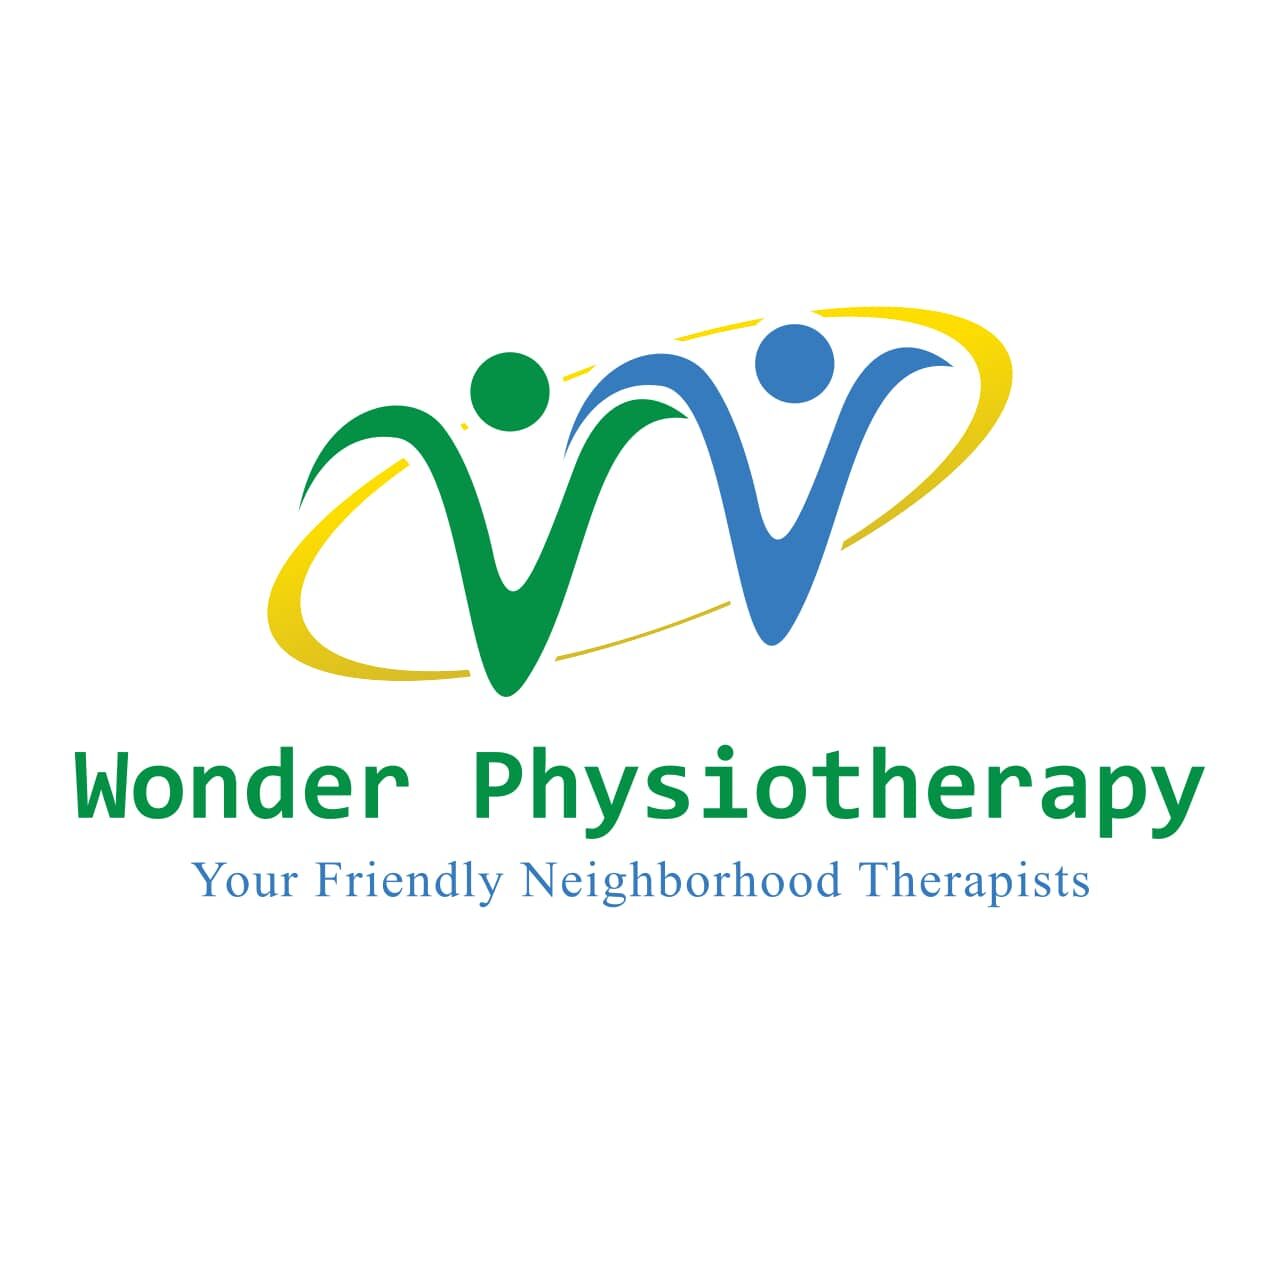 Wonder Physiotherapy